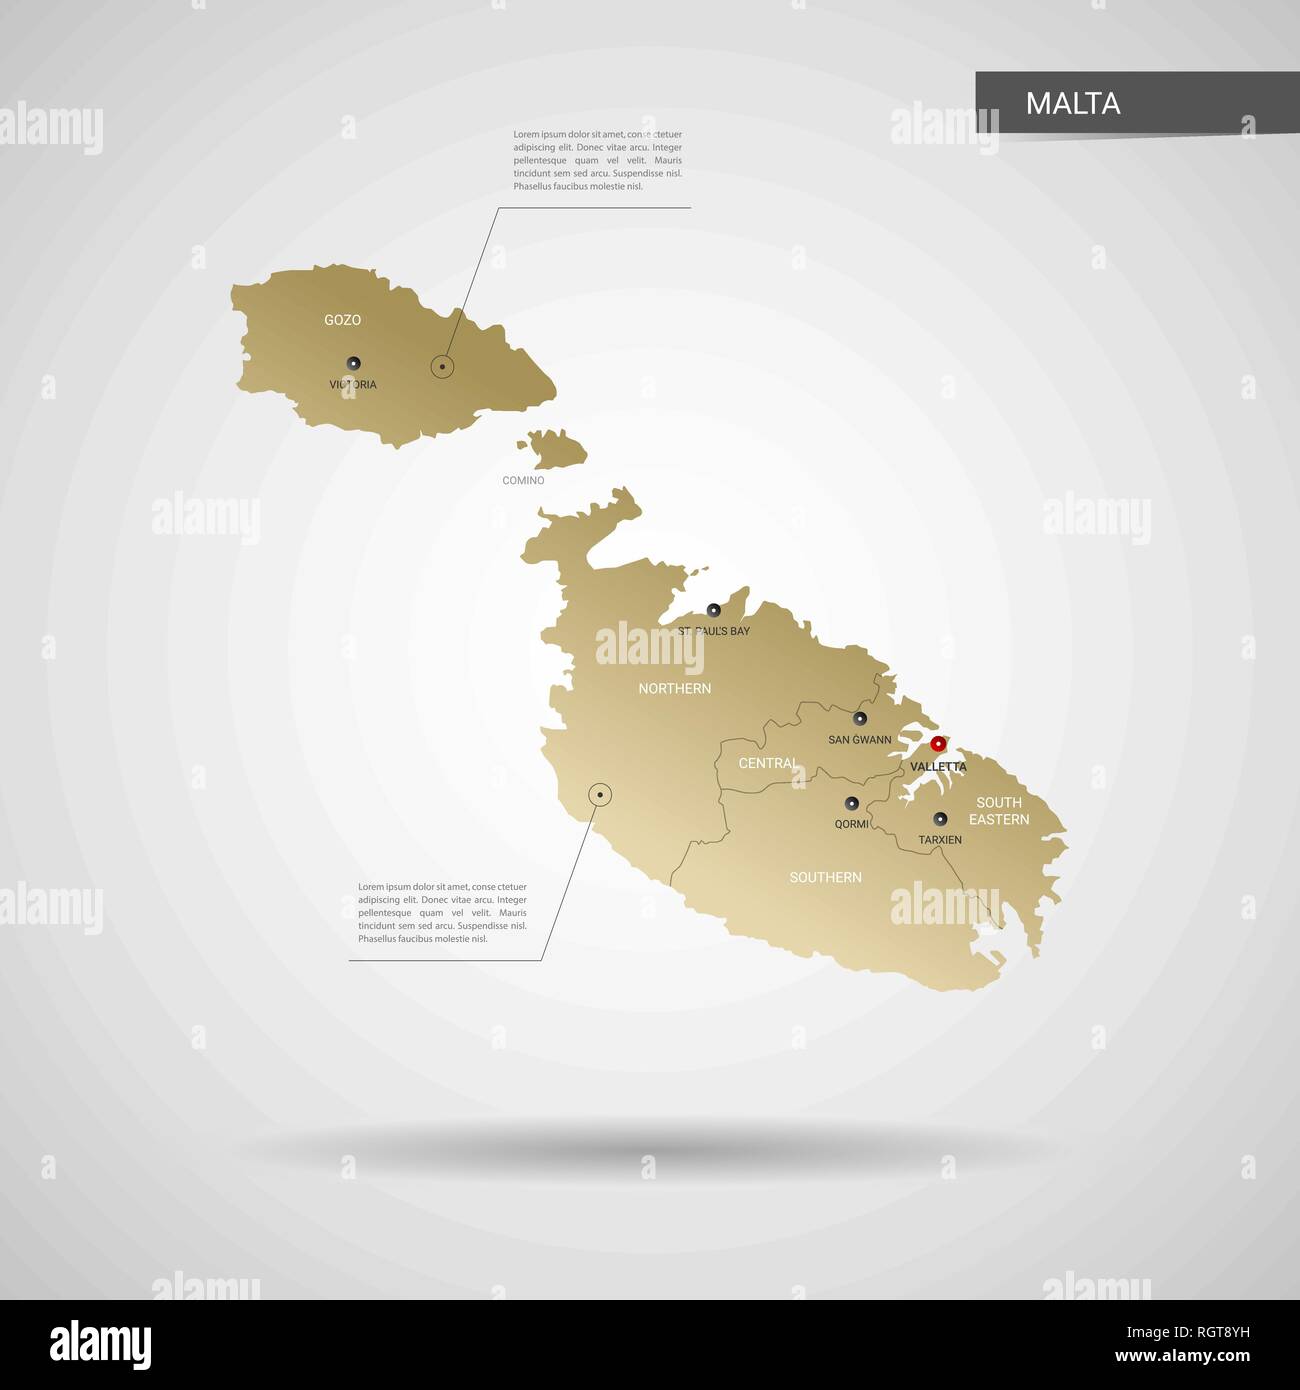 Stylized vector Malta map.  Infographic 3d gold map illustration with cities, borders, capital, administrative divisions and pointer marks, shadow; gr Stock Vector